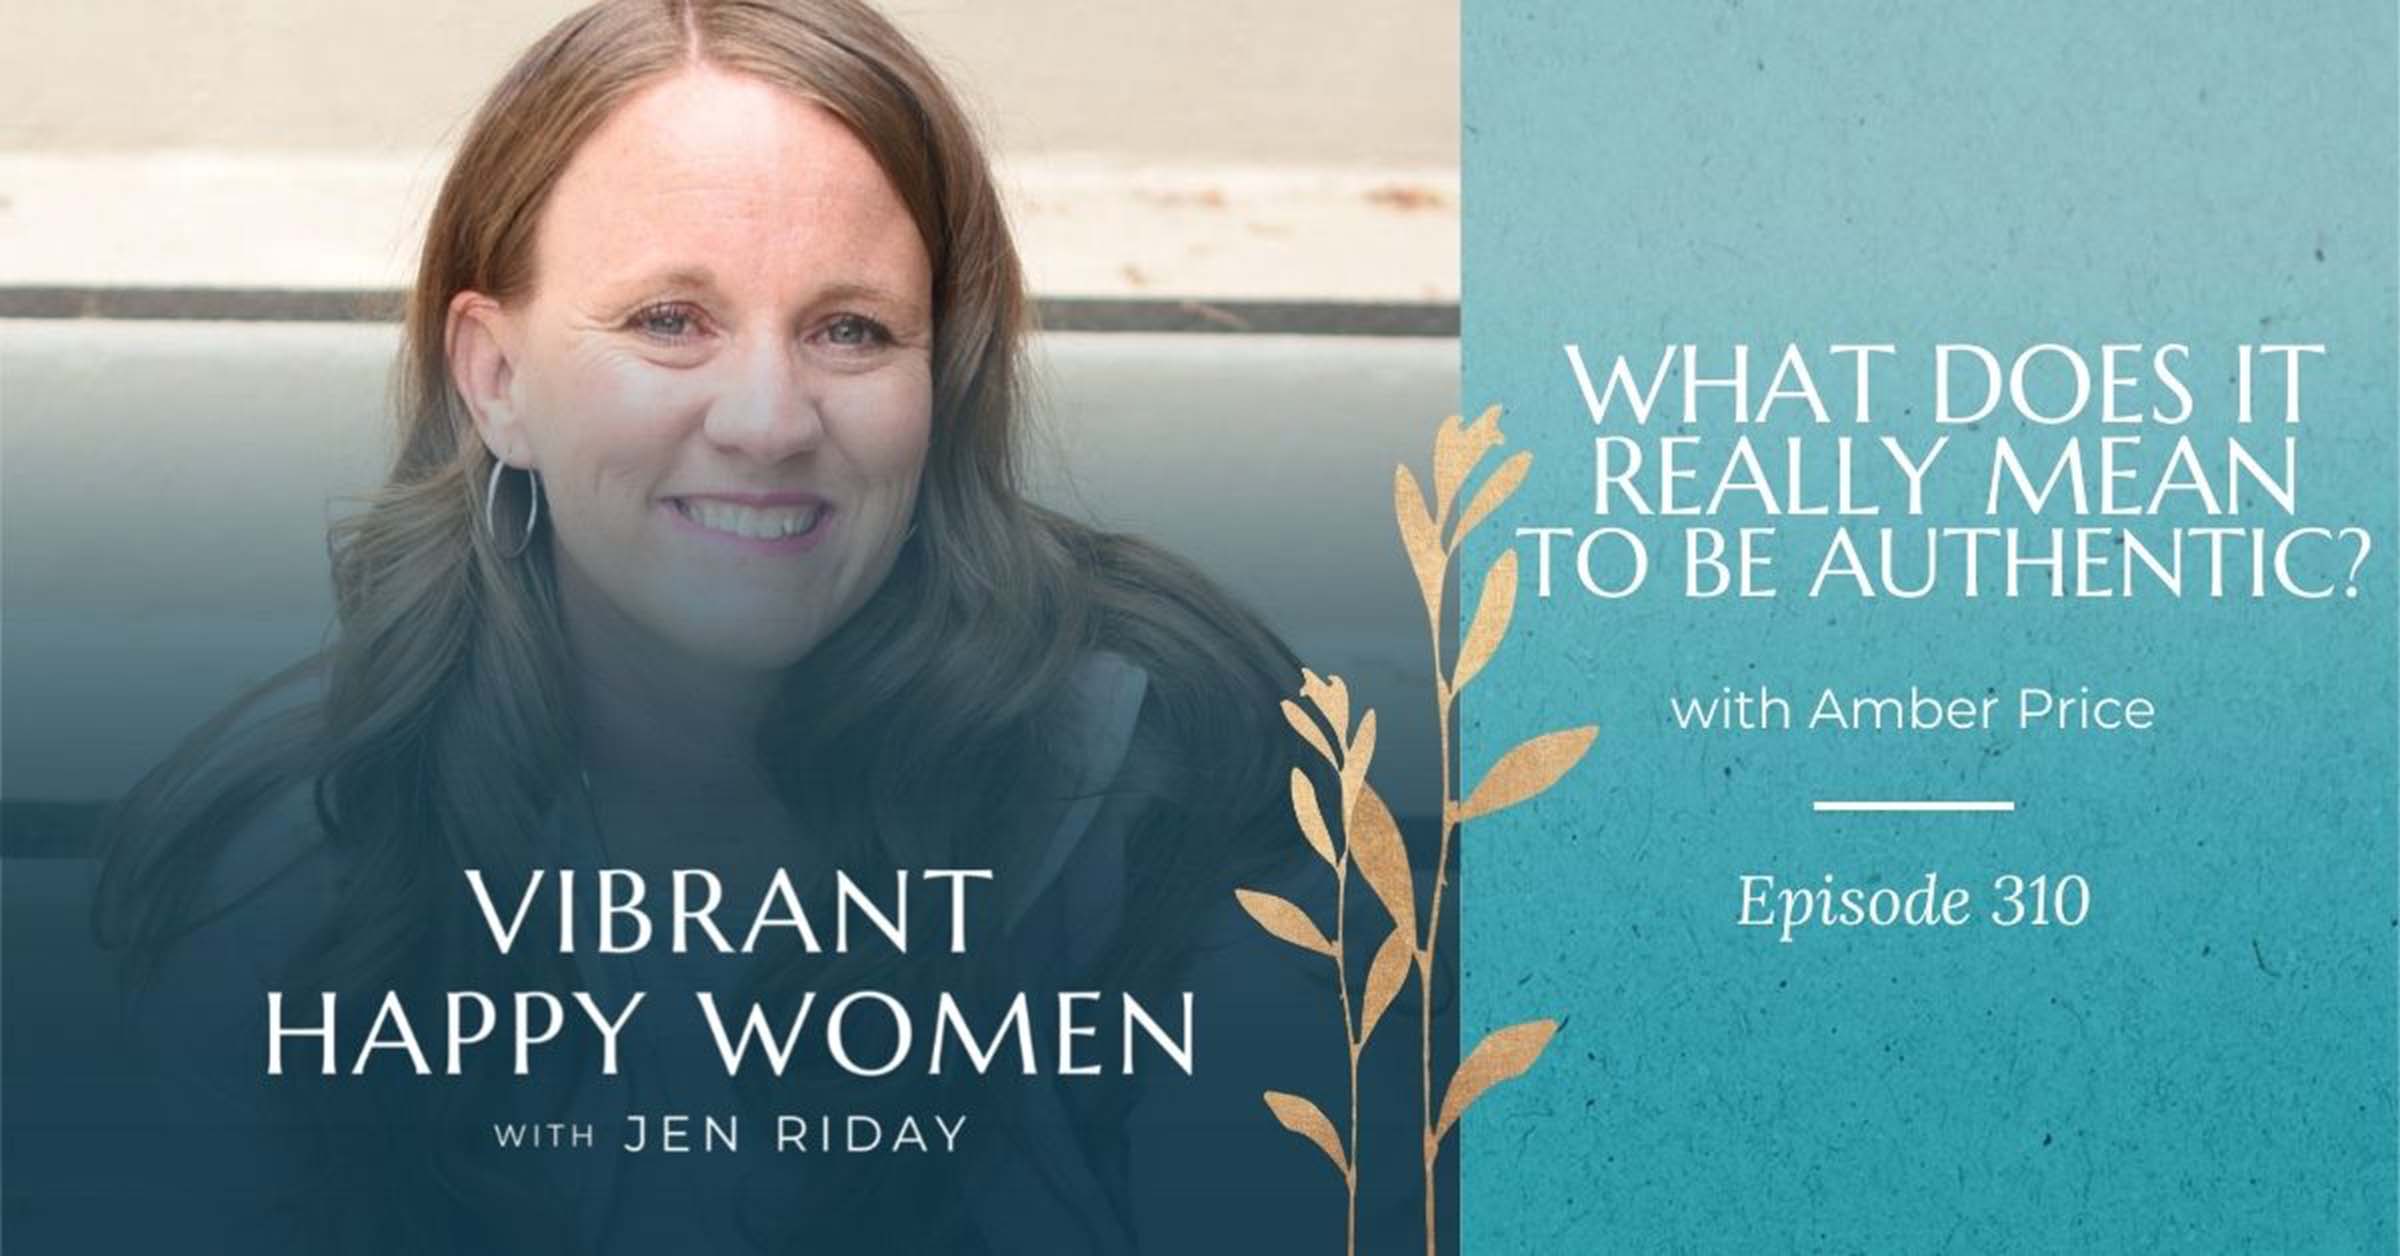 Vibrant Happy Women with Dr. Jen Riday | What Does it Really Mean to Be Authentic? (with Amber Price)